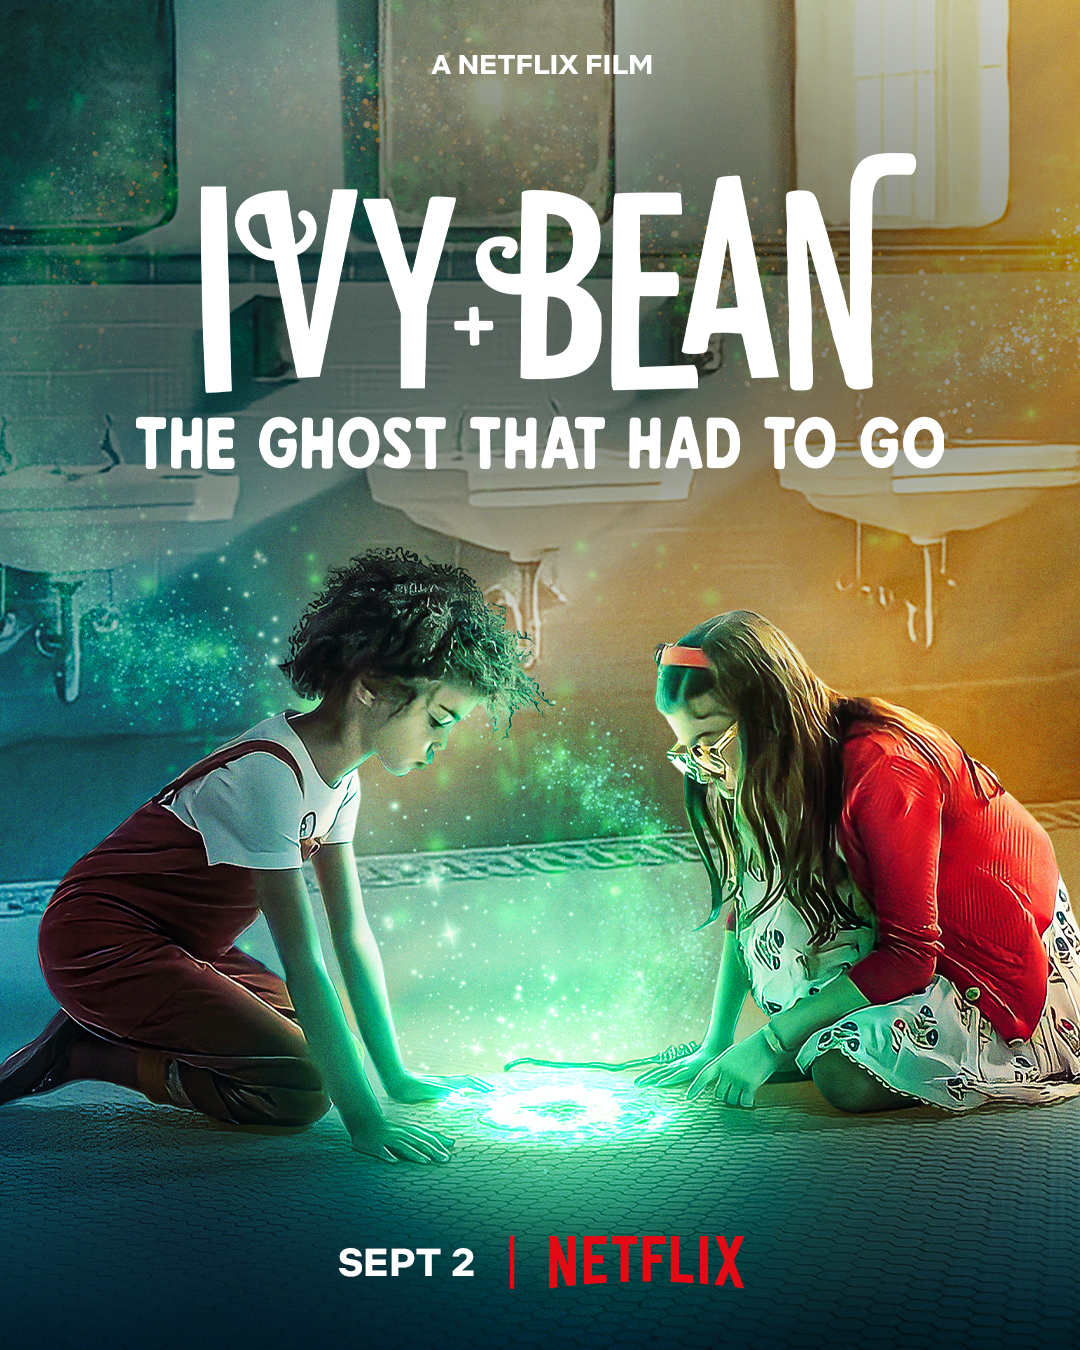 Ivy + Bean: The Ghost That Had To Go and Ivy + Bean: Doomed To Dance key art and production stills